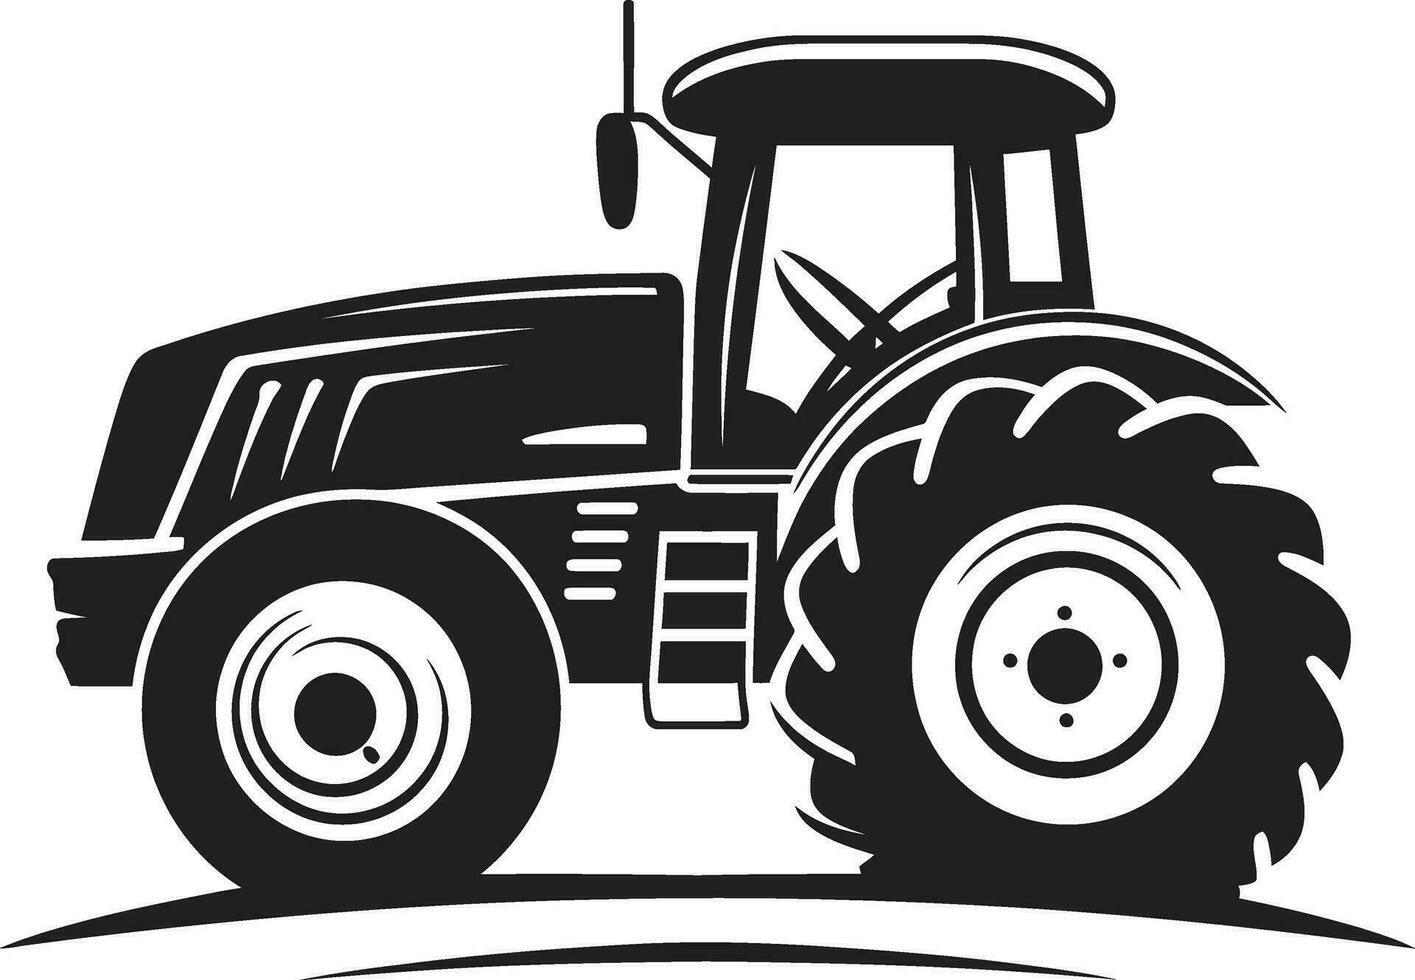 Detailed Tractor Drawing in Black Classic Farming Equipment Illustration vector